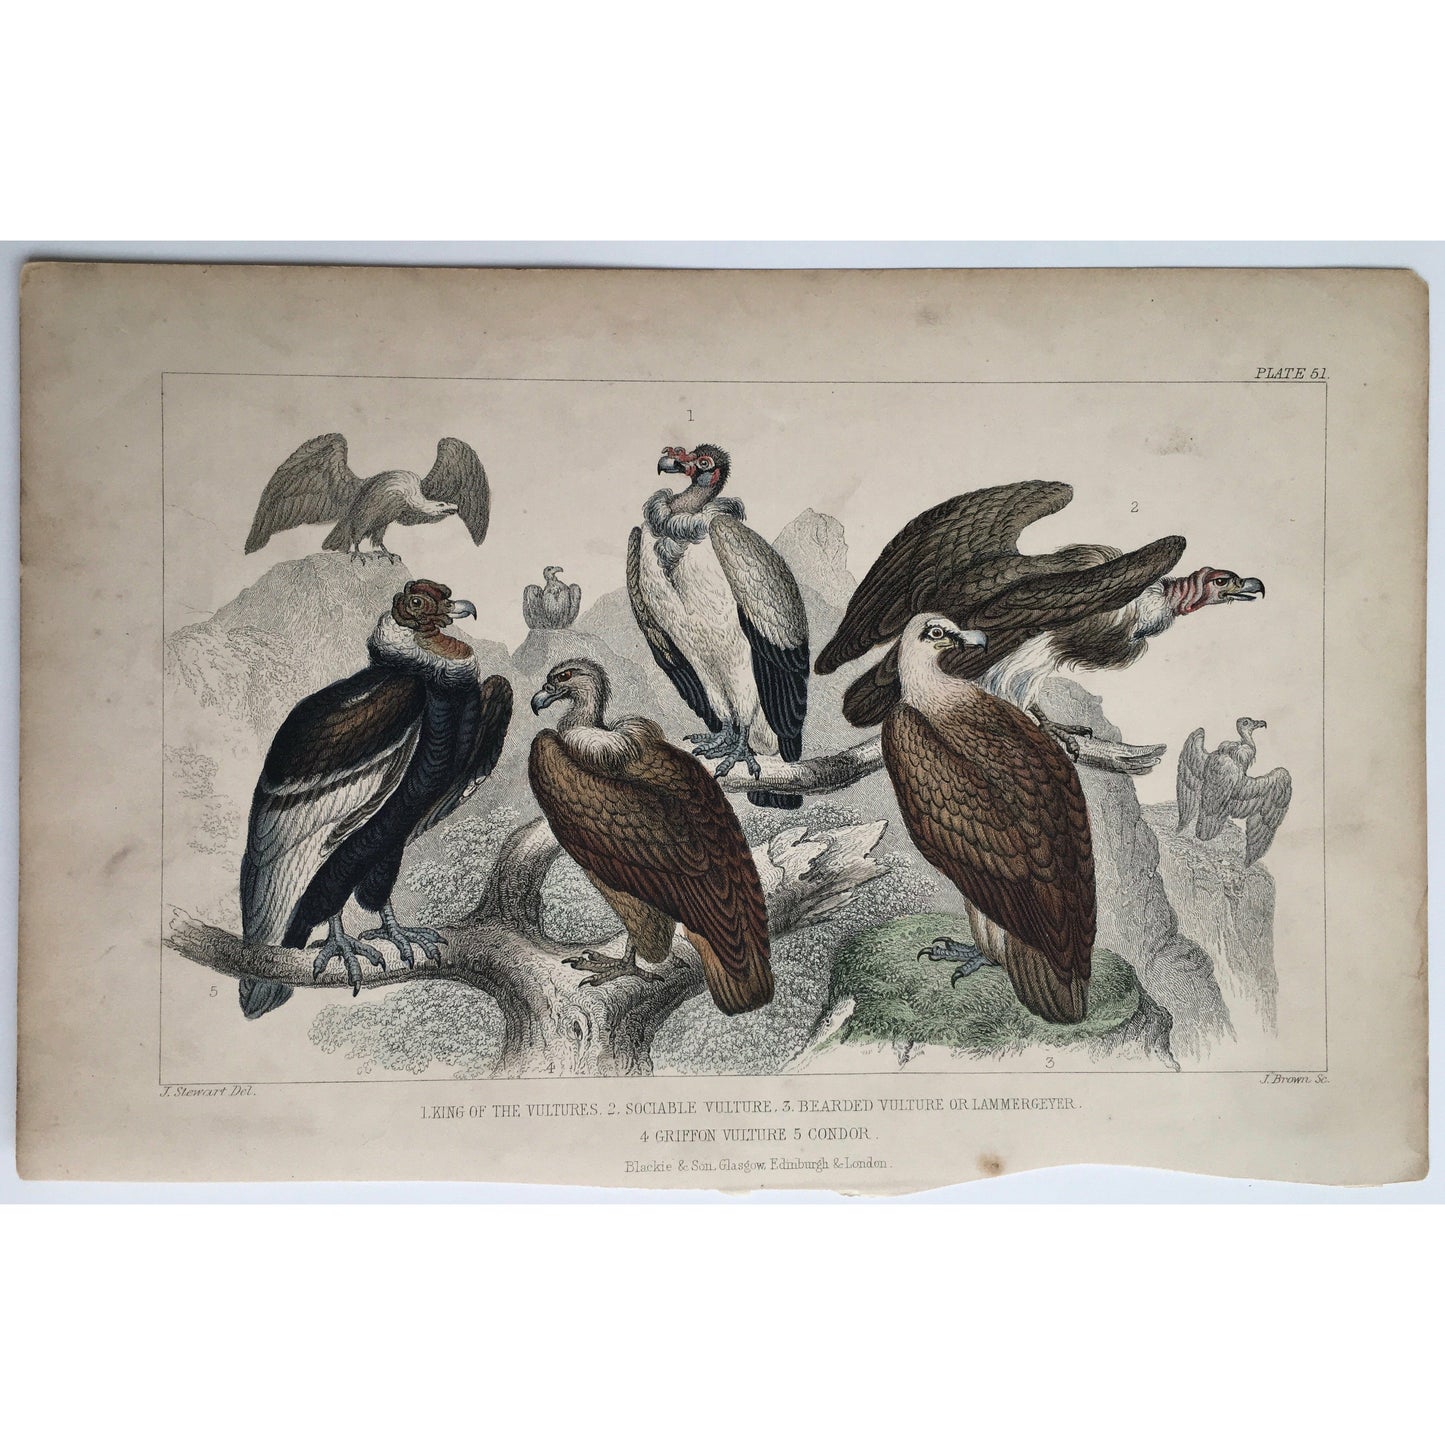 Vulture, King of the Vultures, King Vulture, Sociable Vulture, Bearded Vulture, Lammergeyer, Griffon Vulture, Condor, Bird, Birds, Ornithology, Oliver Goldsmith, Goldsmith, Natural History, Animals, Wildlife, A History of the Earth and Animated Nature, Nature, Blackie & Son, Blackie and Son, 1852, Coloured Colorful, J. Stewart, J. Brown, Stewart, Brown, Antique, Prints, Vintage, Home decor, Wall Art, Original, Collectable, Rare Prints, Unique,